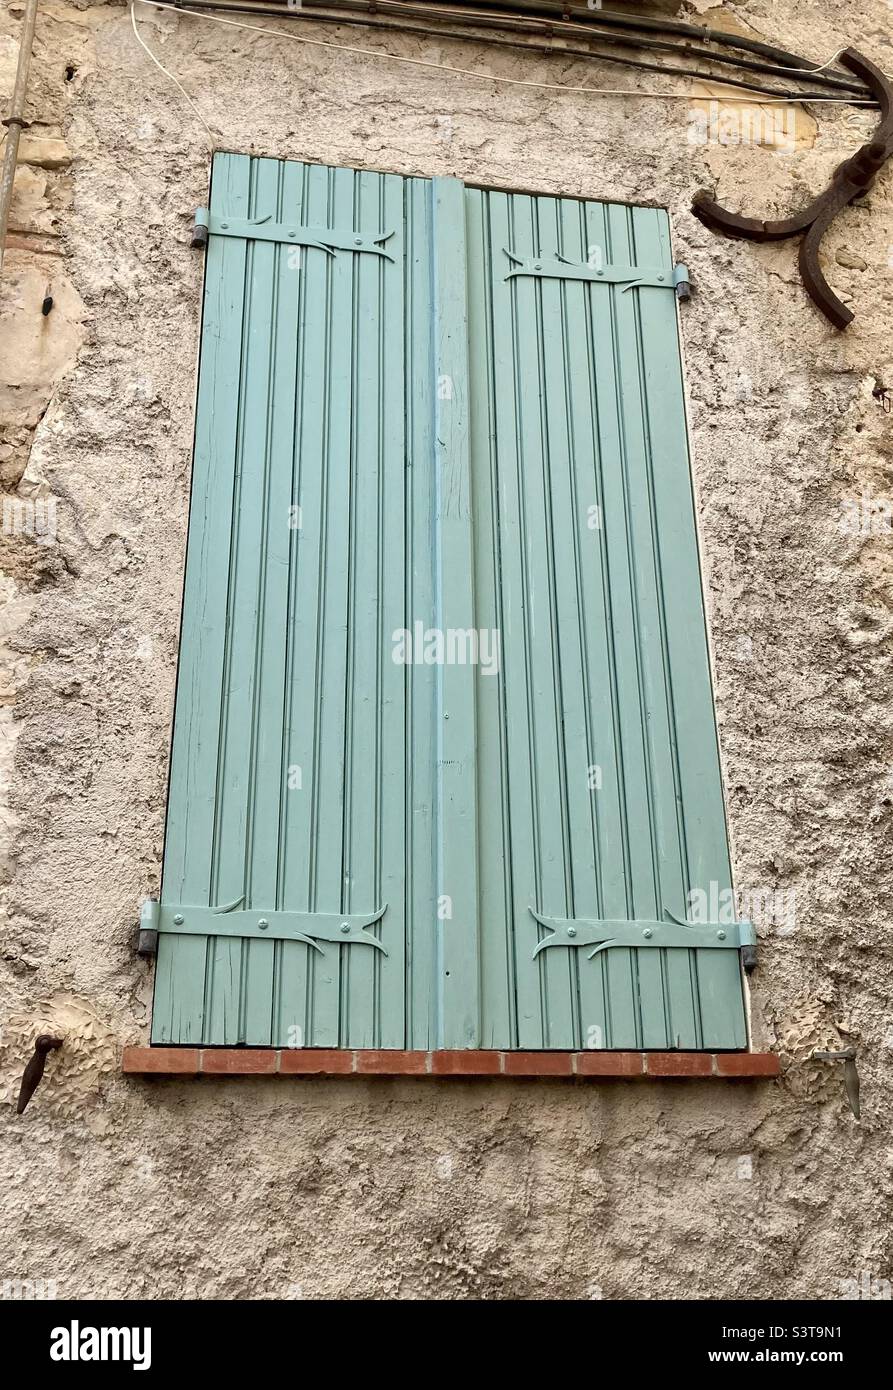 Rustic green shutters found in the Old Town Menton France. Stock Photo